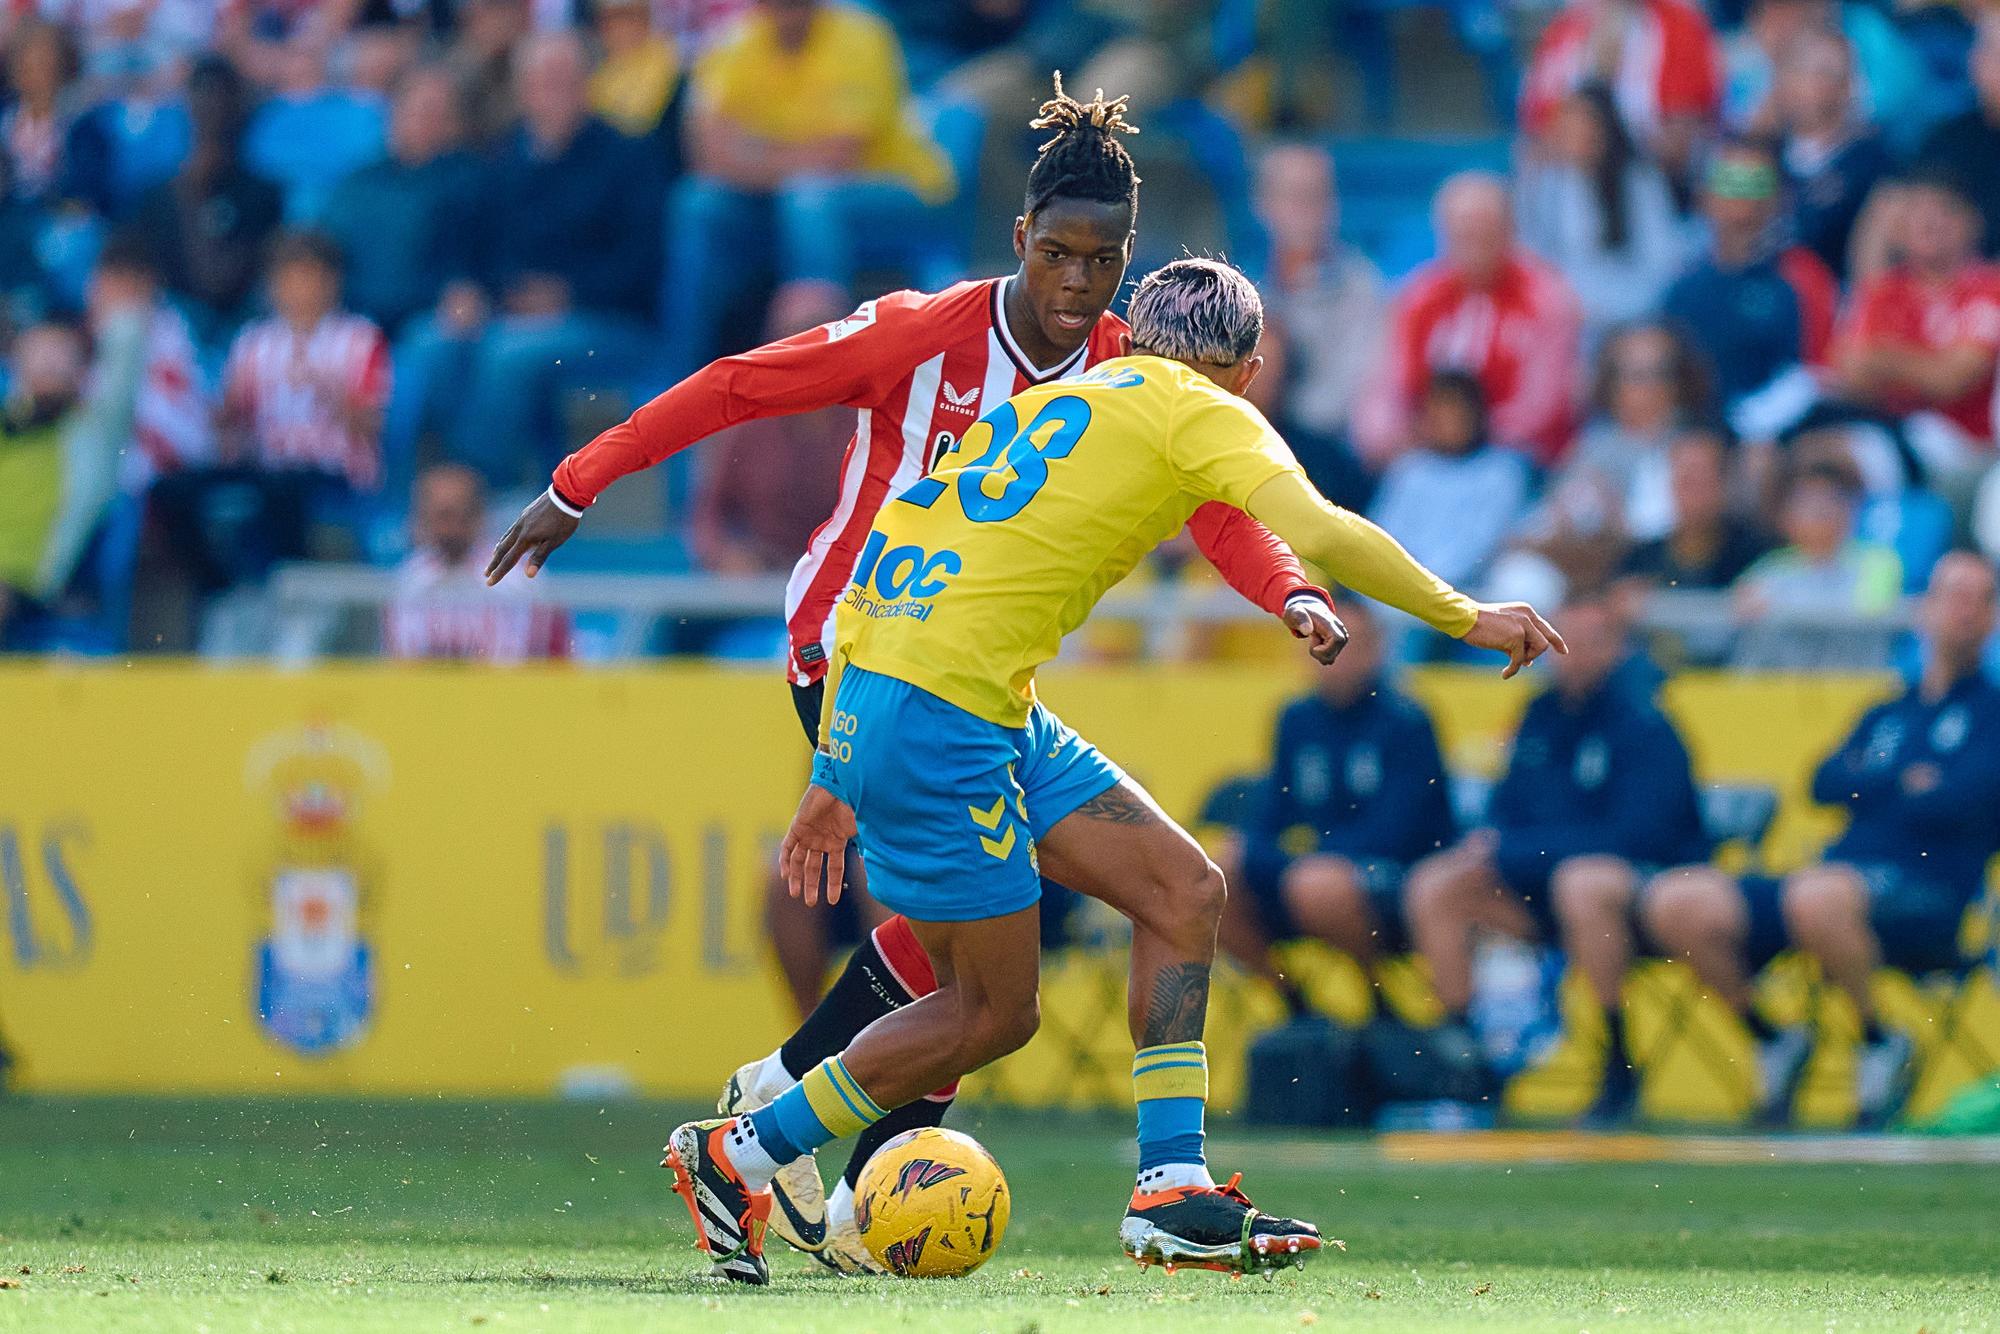 Nico Williams of Athletic Club in action during the Spanish league, La Liga EA Sports, football match played between UD Las Palmas and Athletic Club at Estadio Gran Canaria on March 10, 2024, in Las Palmas de Gran Canaria, Spain. AFP7 10/03/2024 ONLY FOR USE IN SPAIN / Gabriel Jimenez / AFP7 / Europa Press;2024;SOCCER;Sport;ZSOCCER;ZSPORT;UD Las Palmas v Athletic Club - La Liga EA Sports;